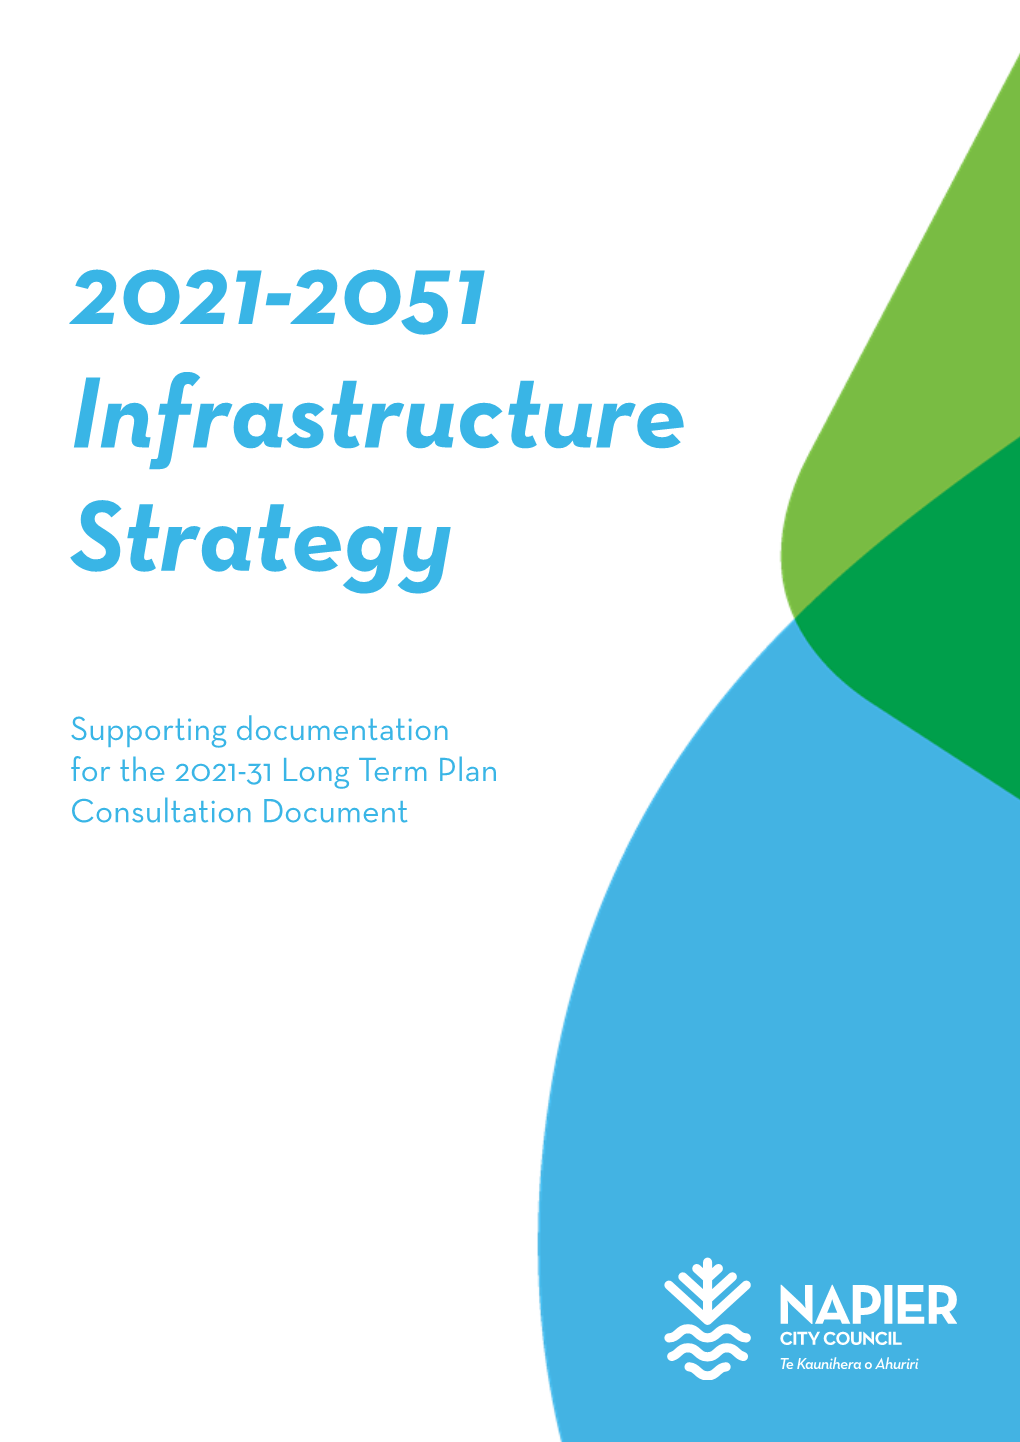 2021-2051 Infrastructure Strategy